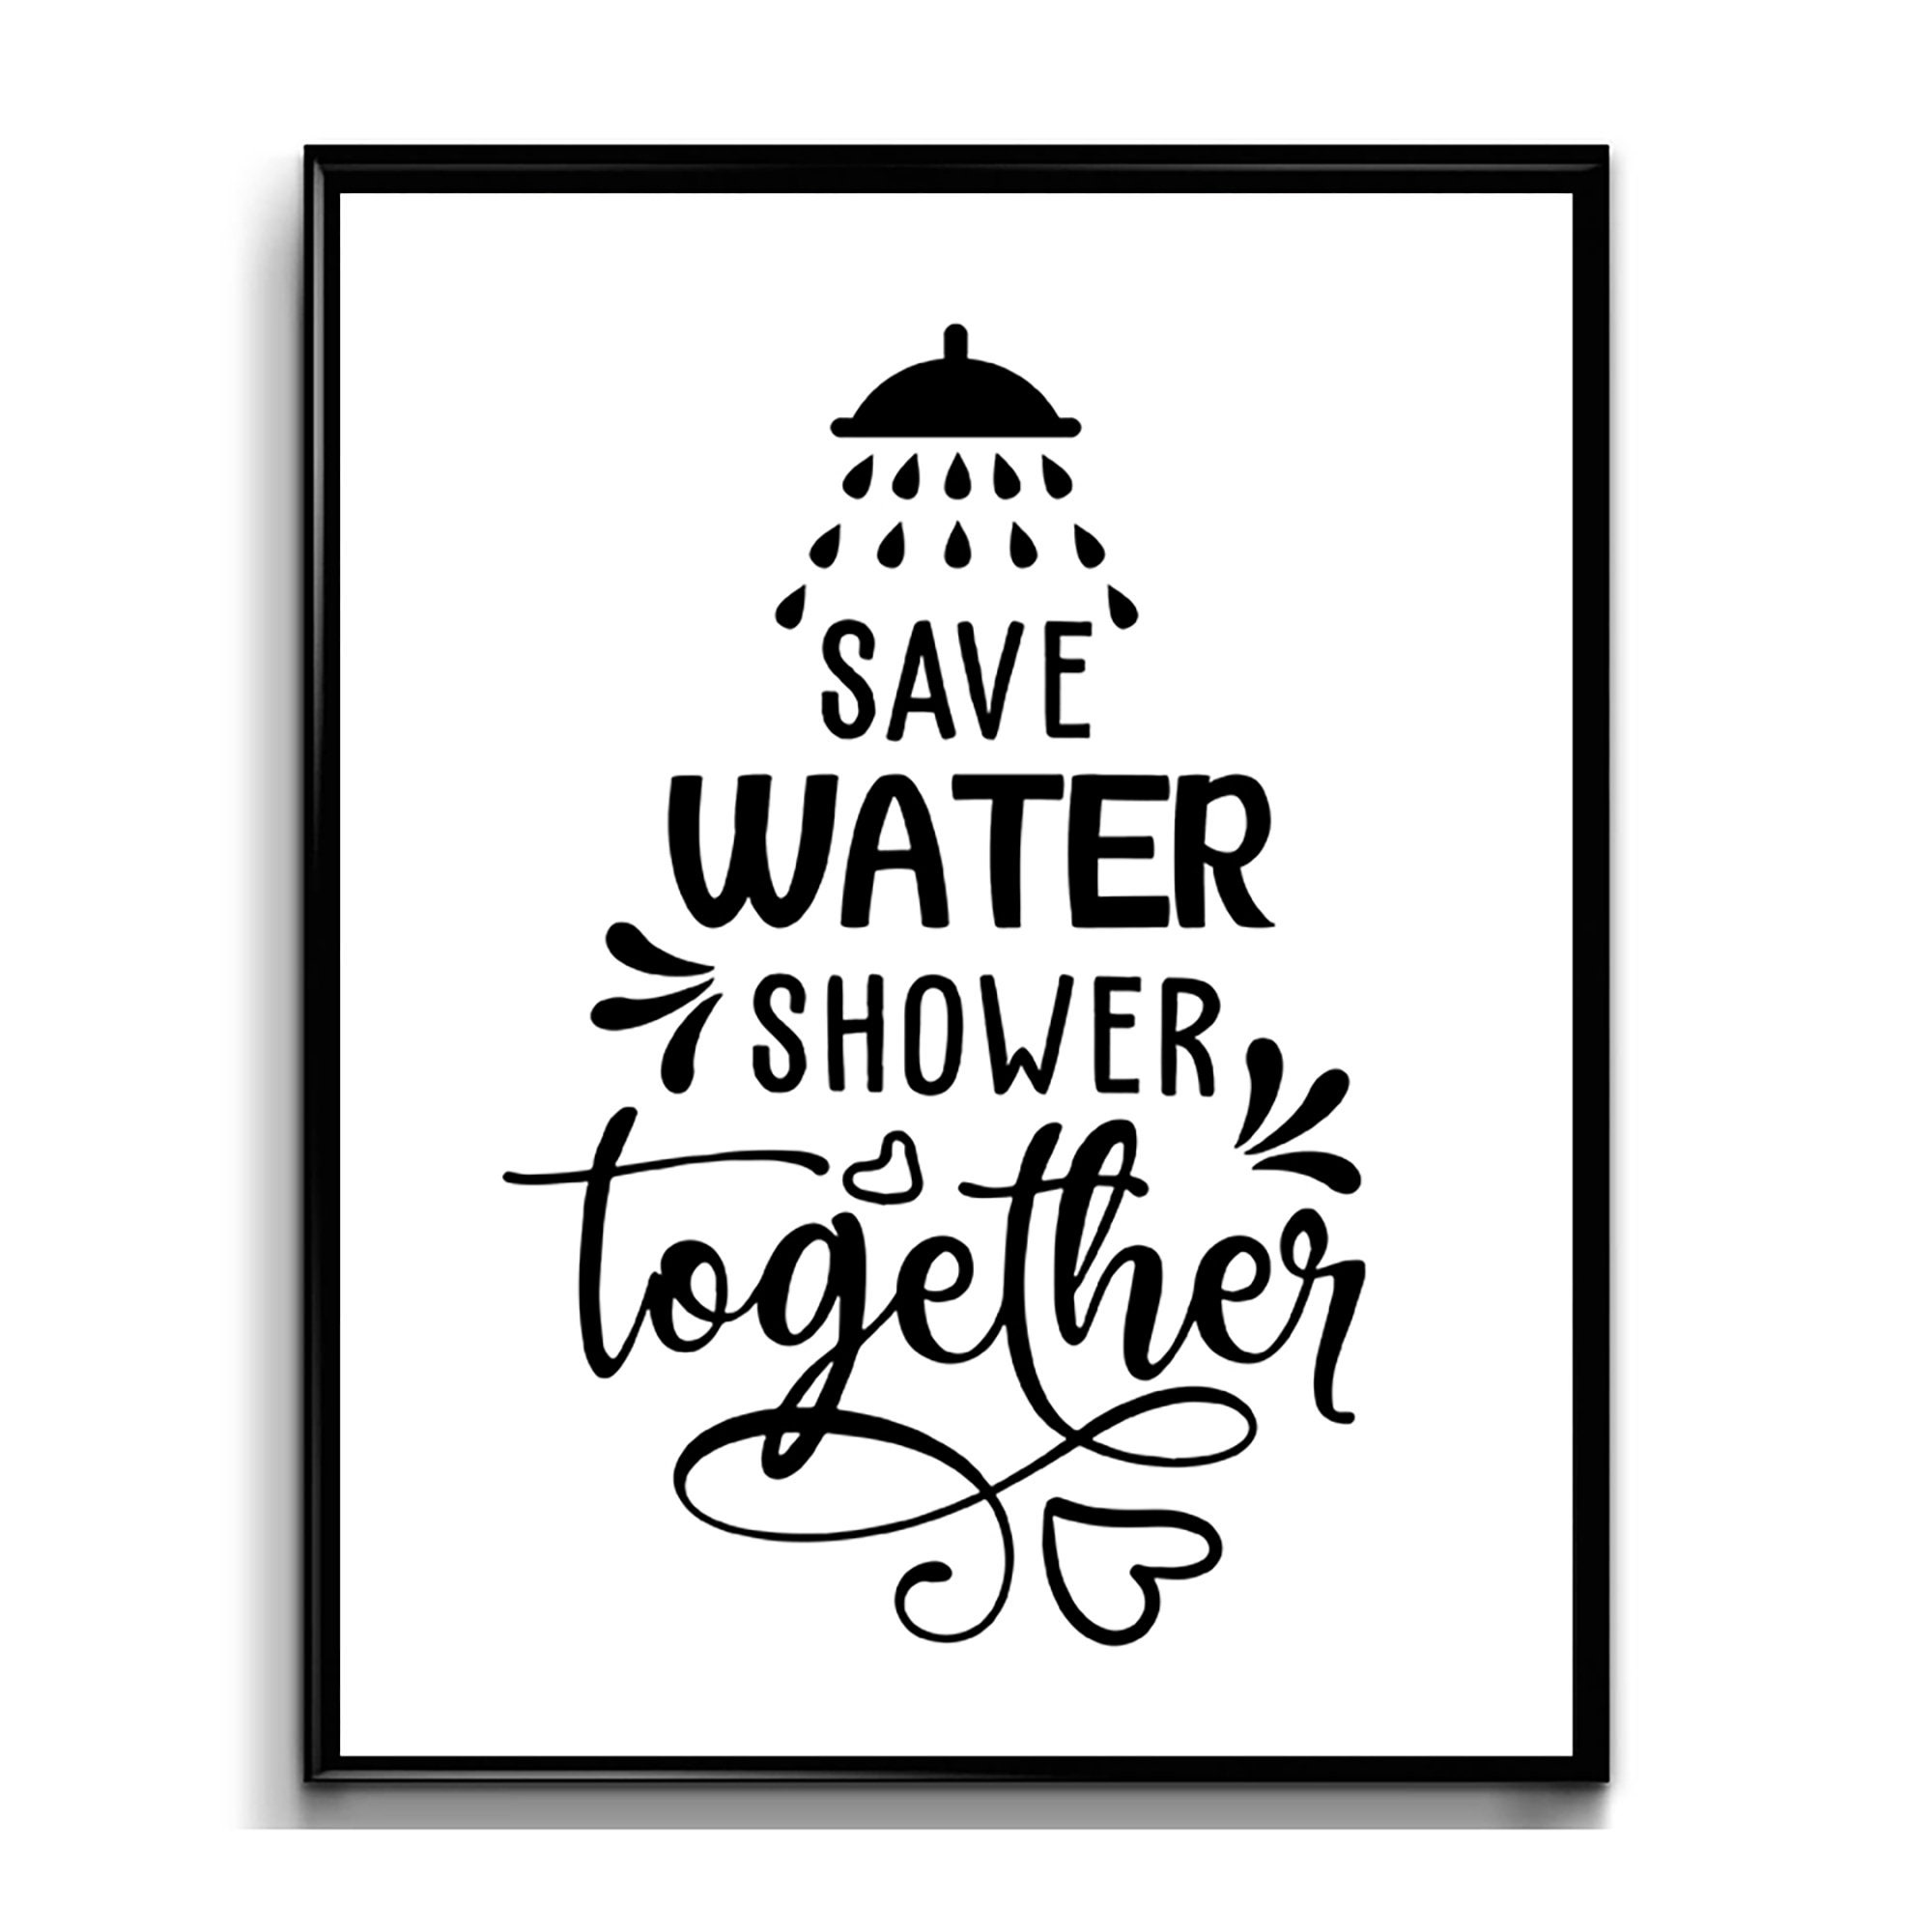 Save Water Shower Together Sign Print Inspiration Quote Décor Etsy De